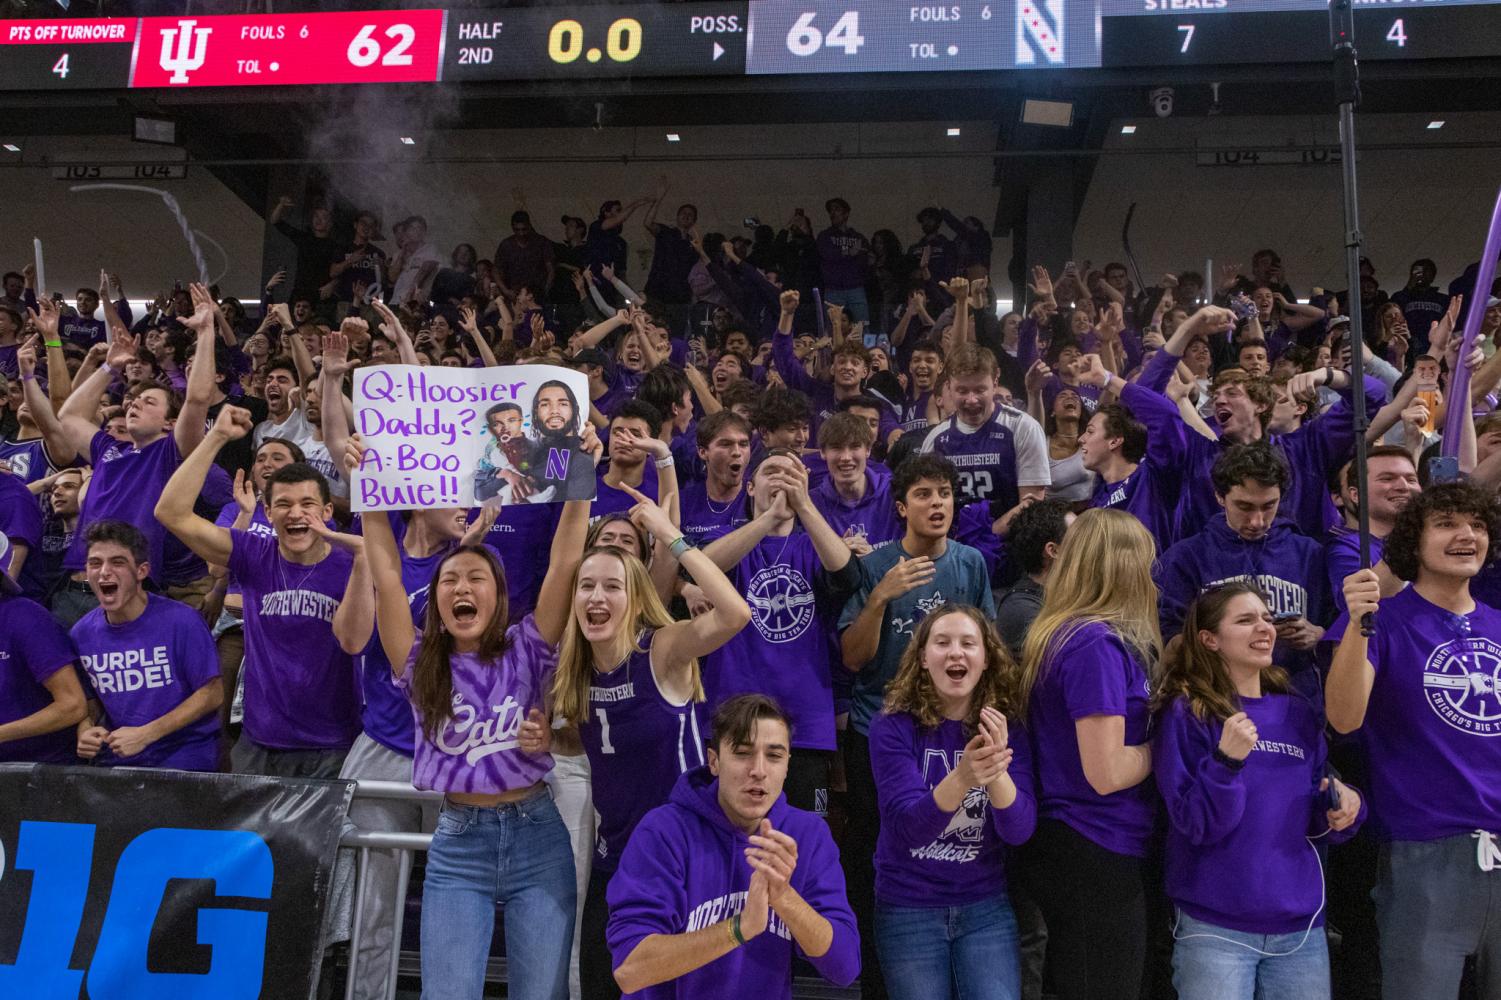 A crowd of people wearing purple cheer for a basketball game.